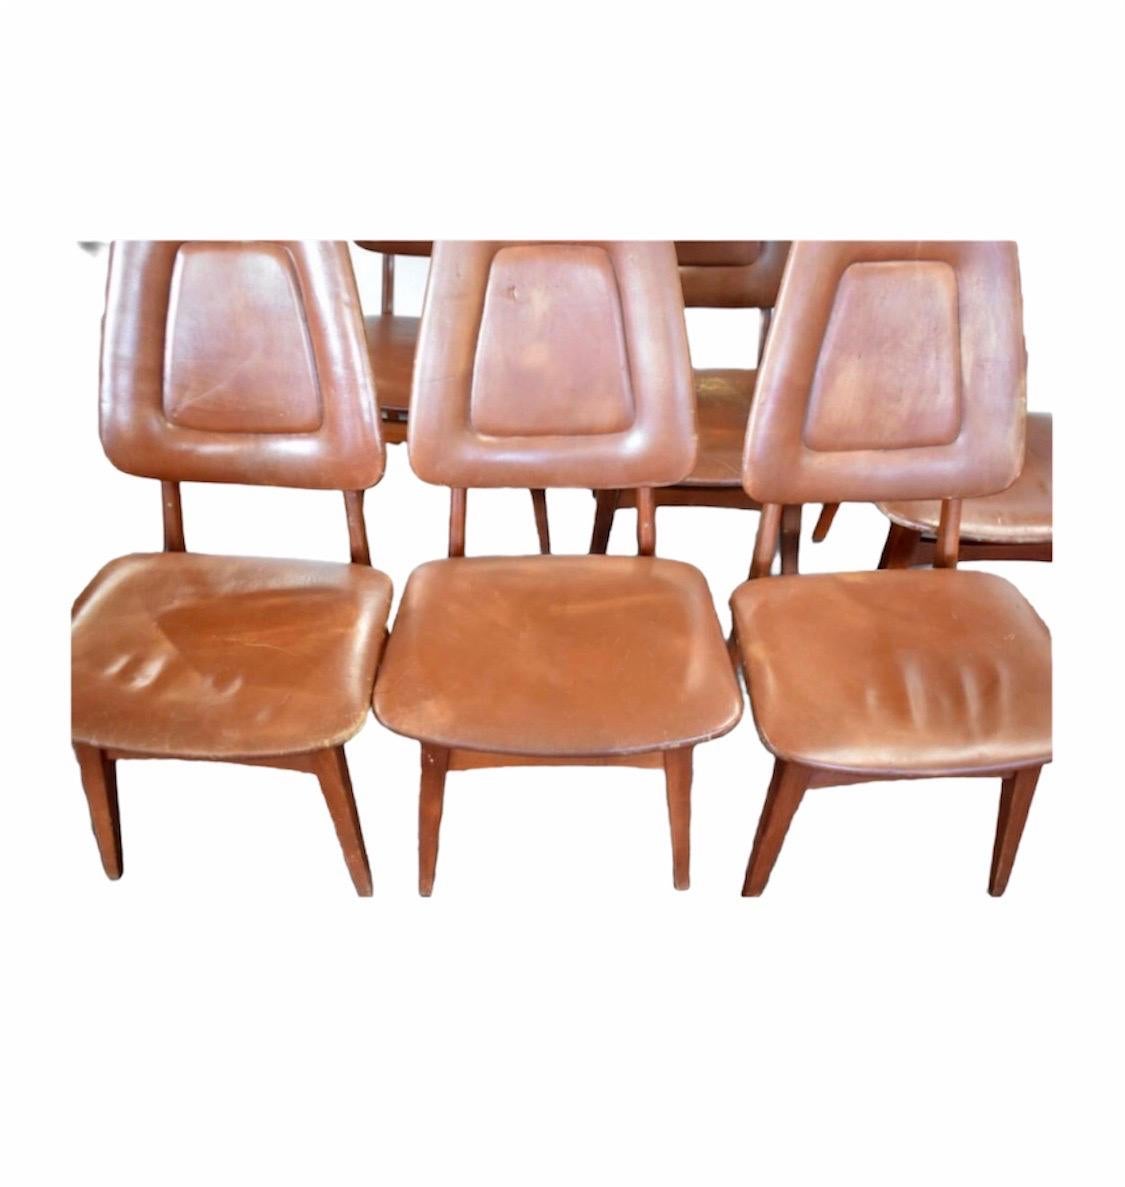 Vintage Danish modern dining chairs set of 6.

Dimensions. 20 W ; 40 H ; 24 D
 Seat height 18.